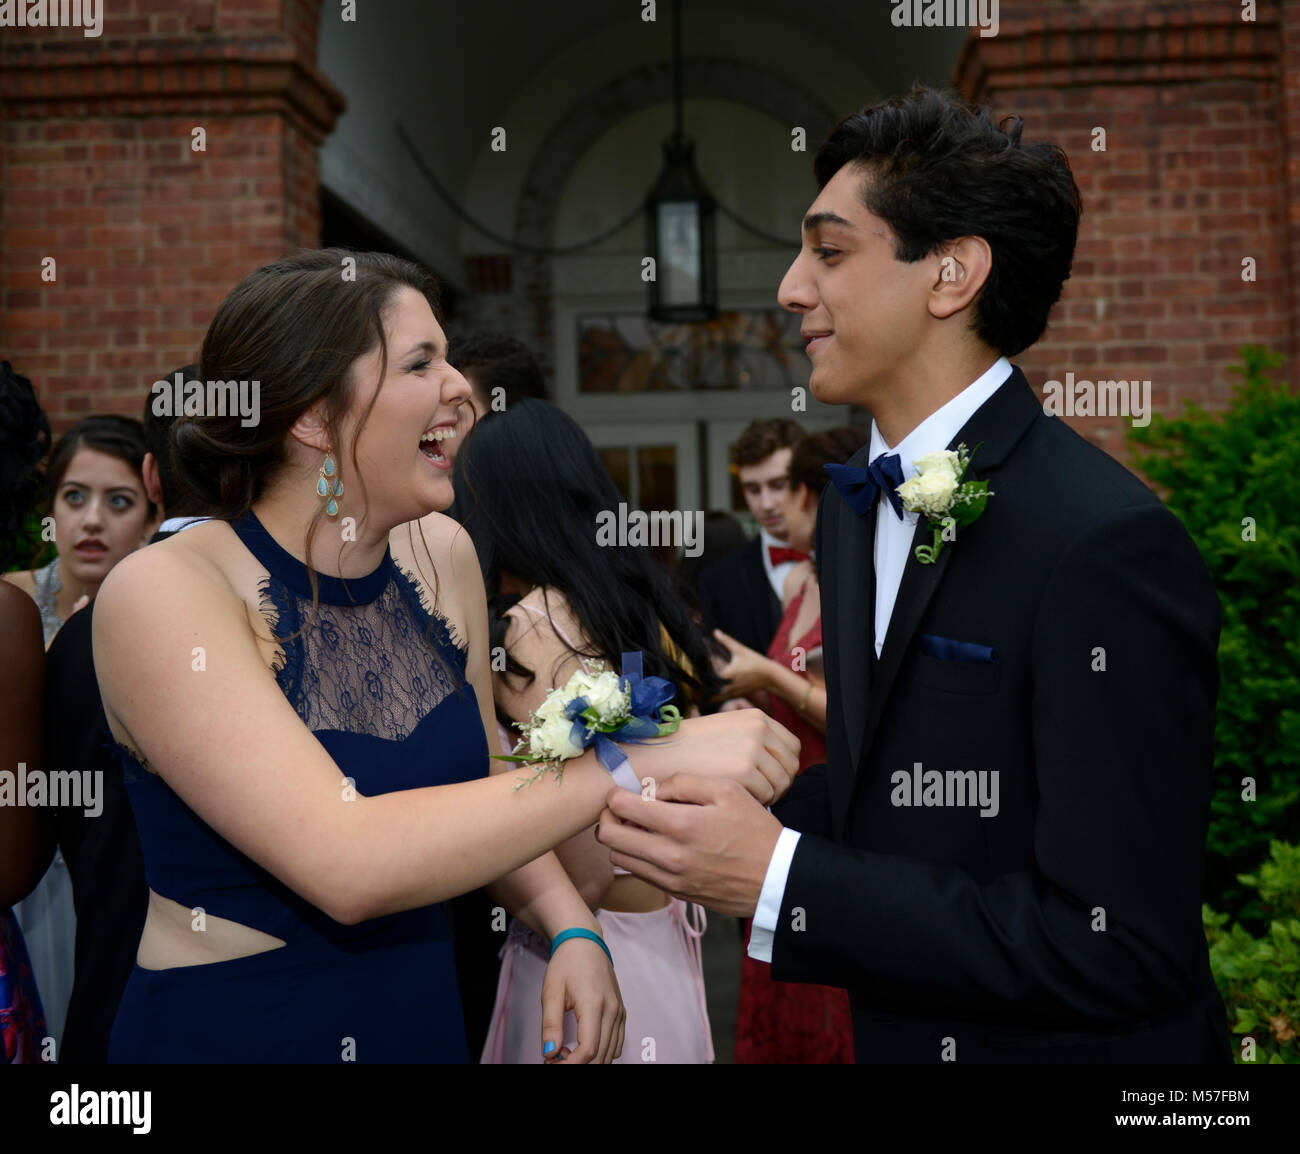 17 yr old high school juniors who just put on their boutonniere and wrist bouquet for prom.  He is Indian-American and she is caucasian. Stock Photo